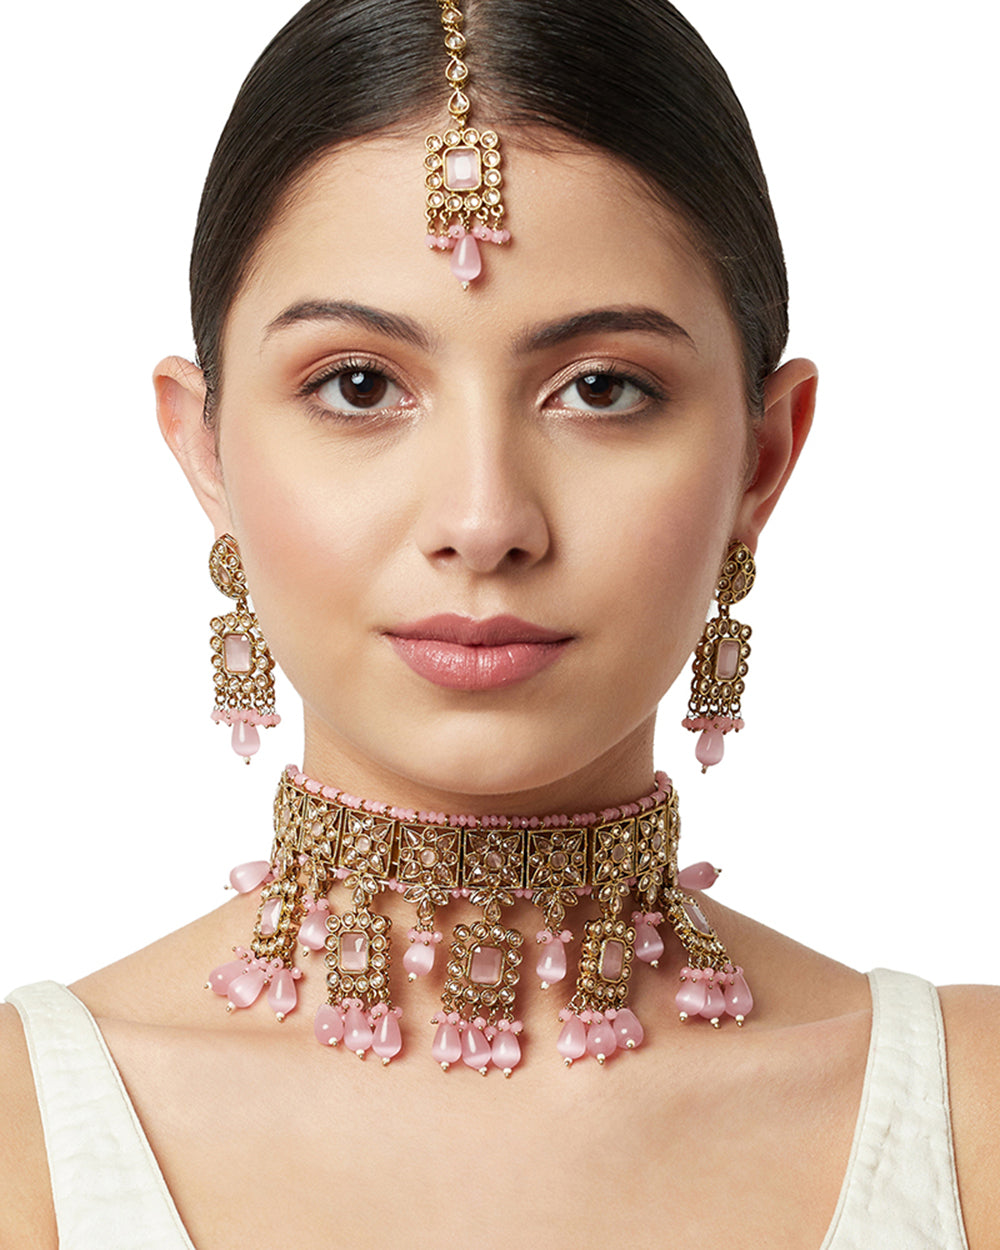 Women's Gold Plated Necklace With Glamorising Pink Gemstones - Voylla